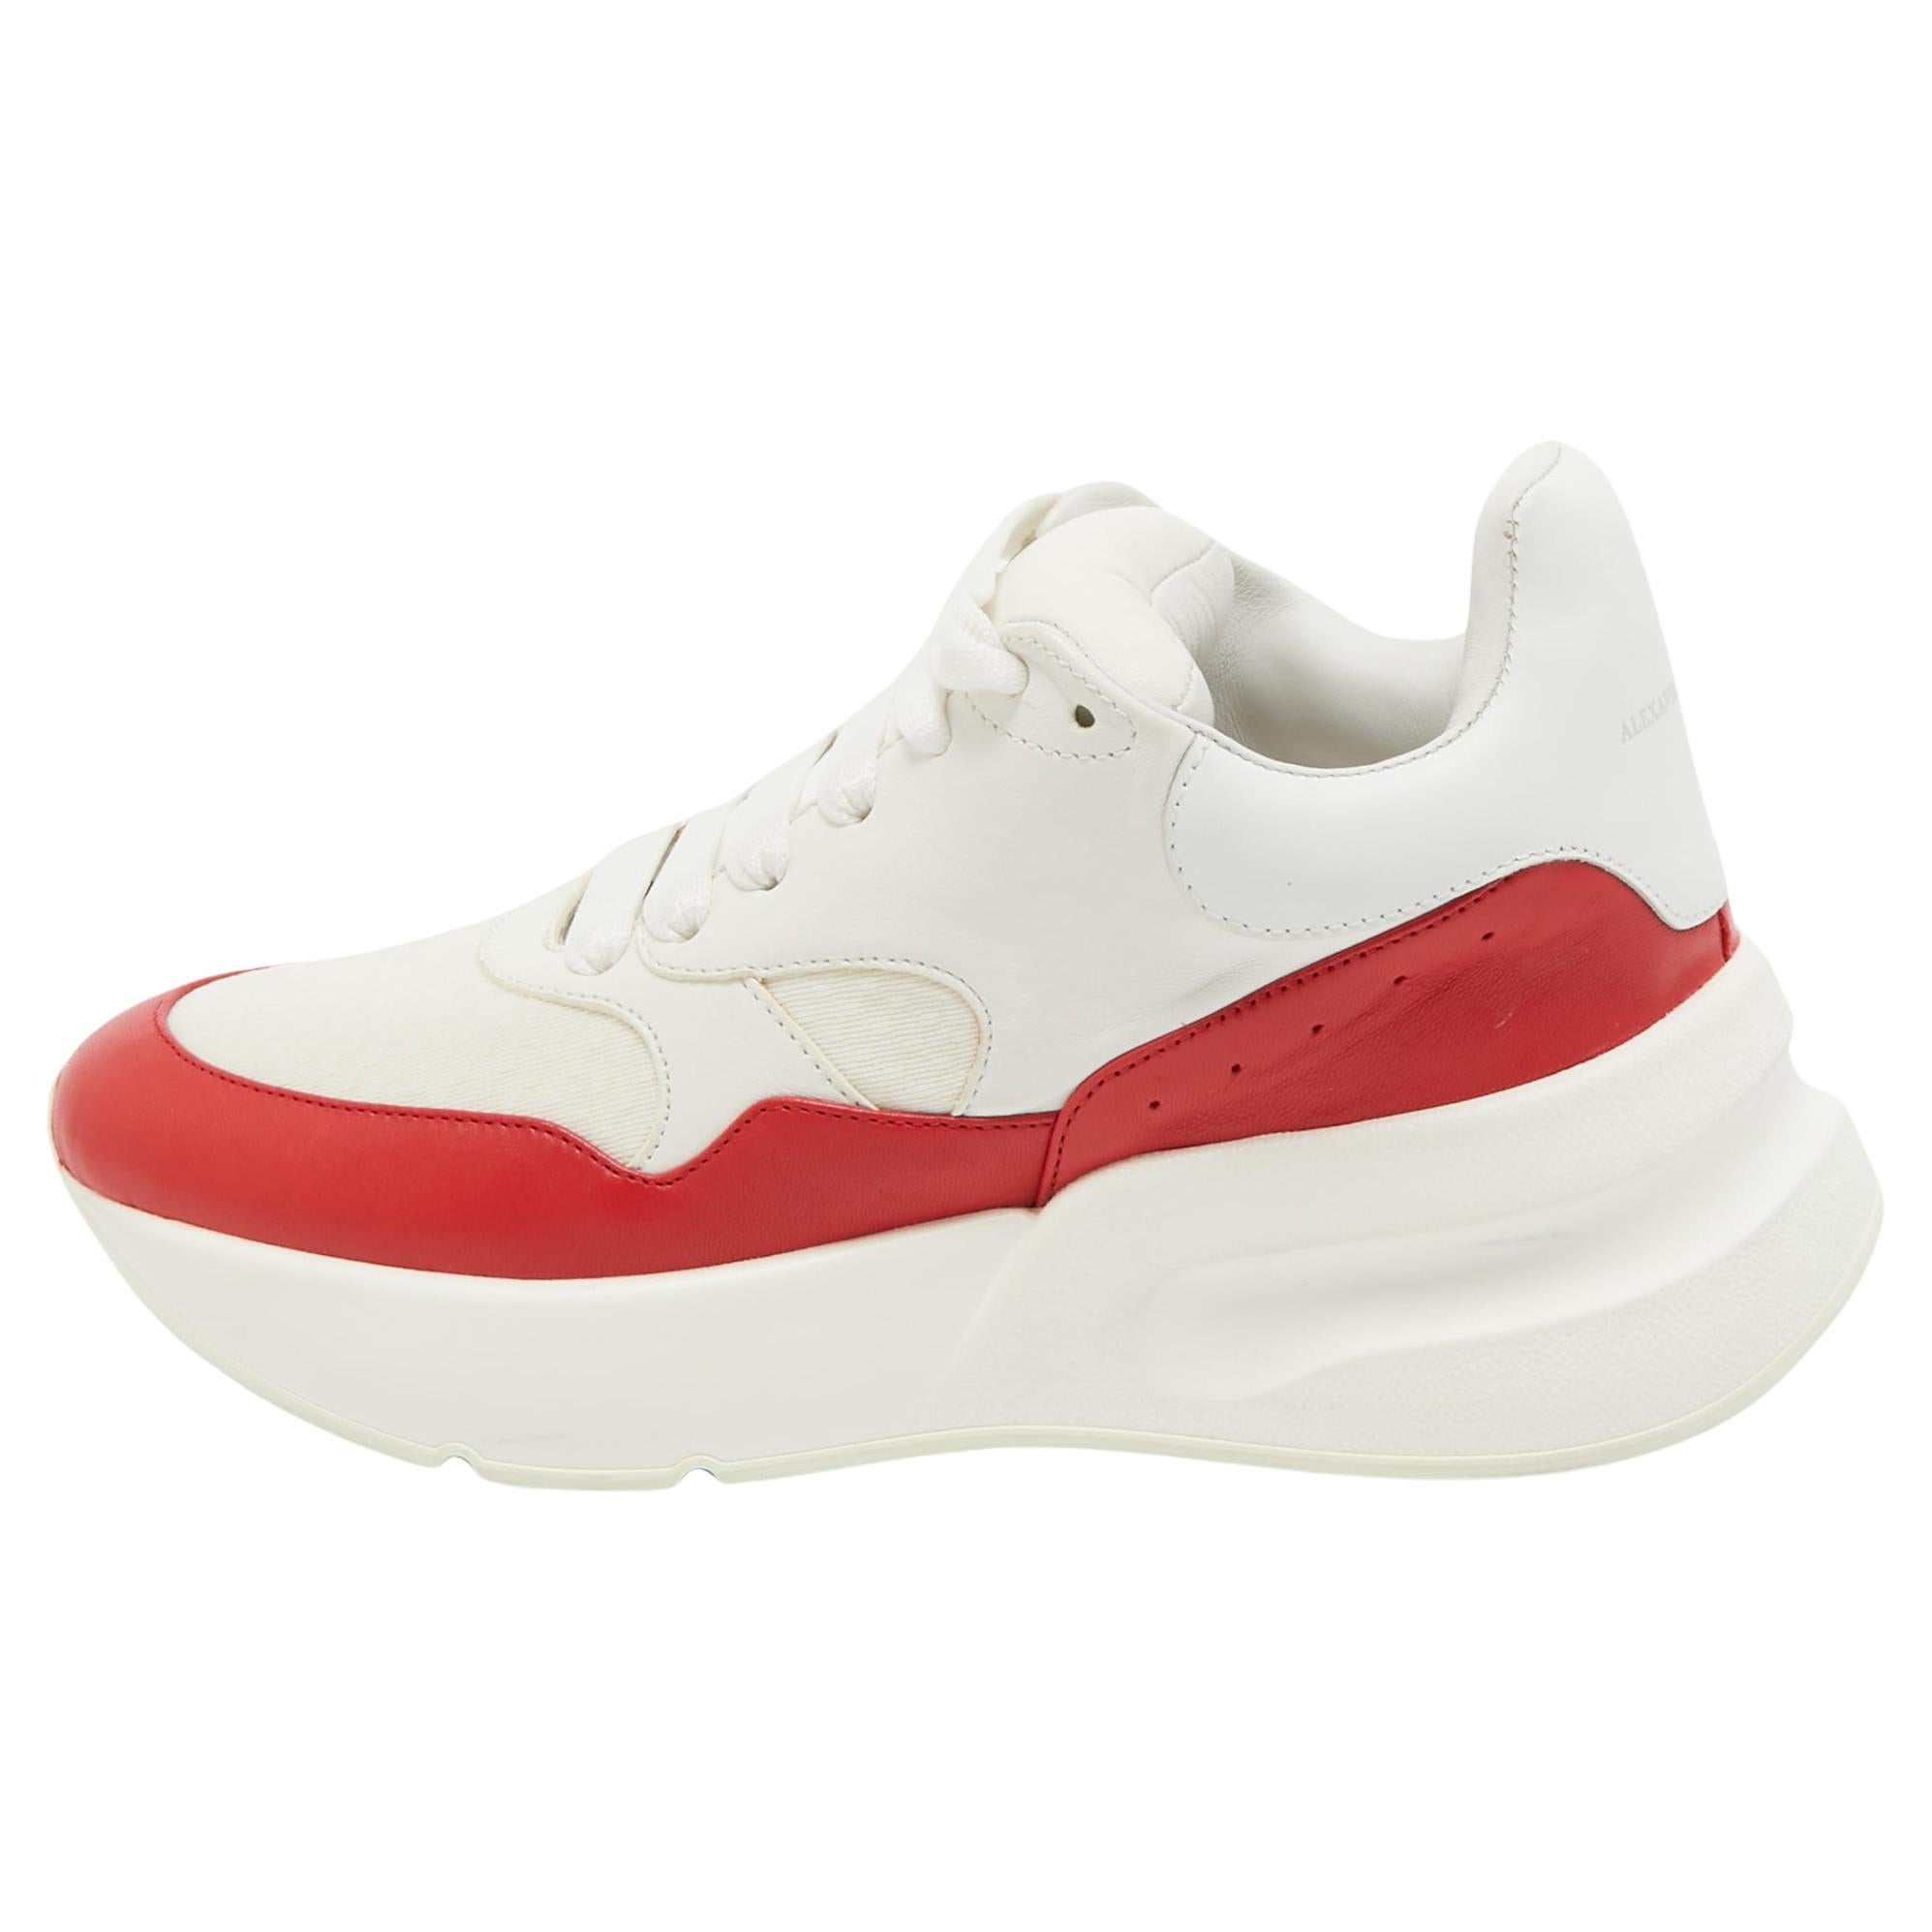 Alexander McQueen White/Red Leather and Canvas Larry Sneakers Size 38